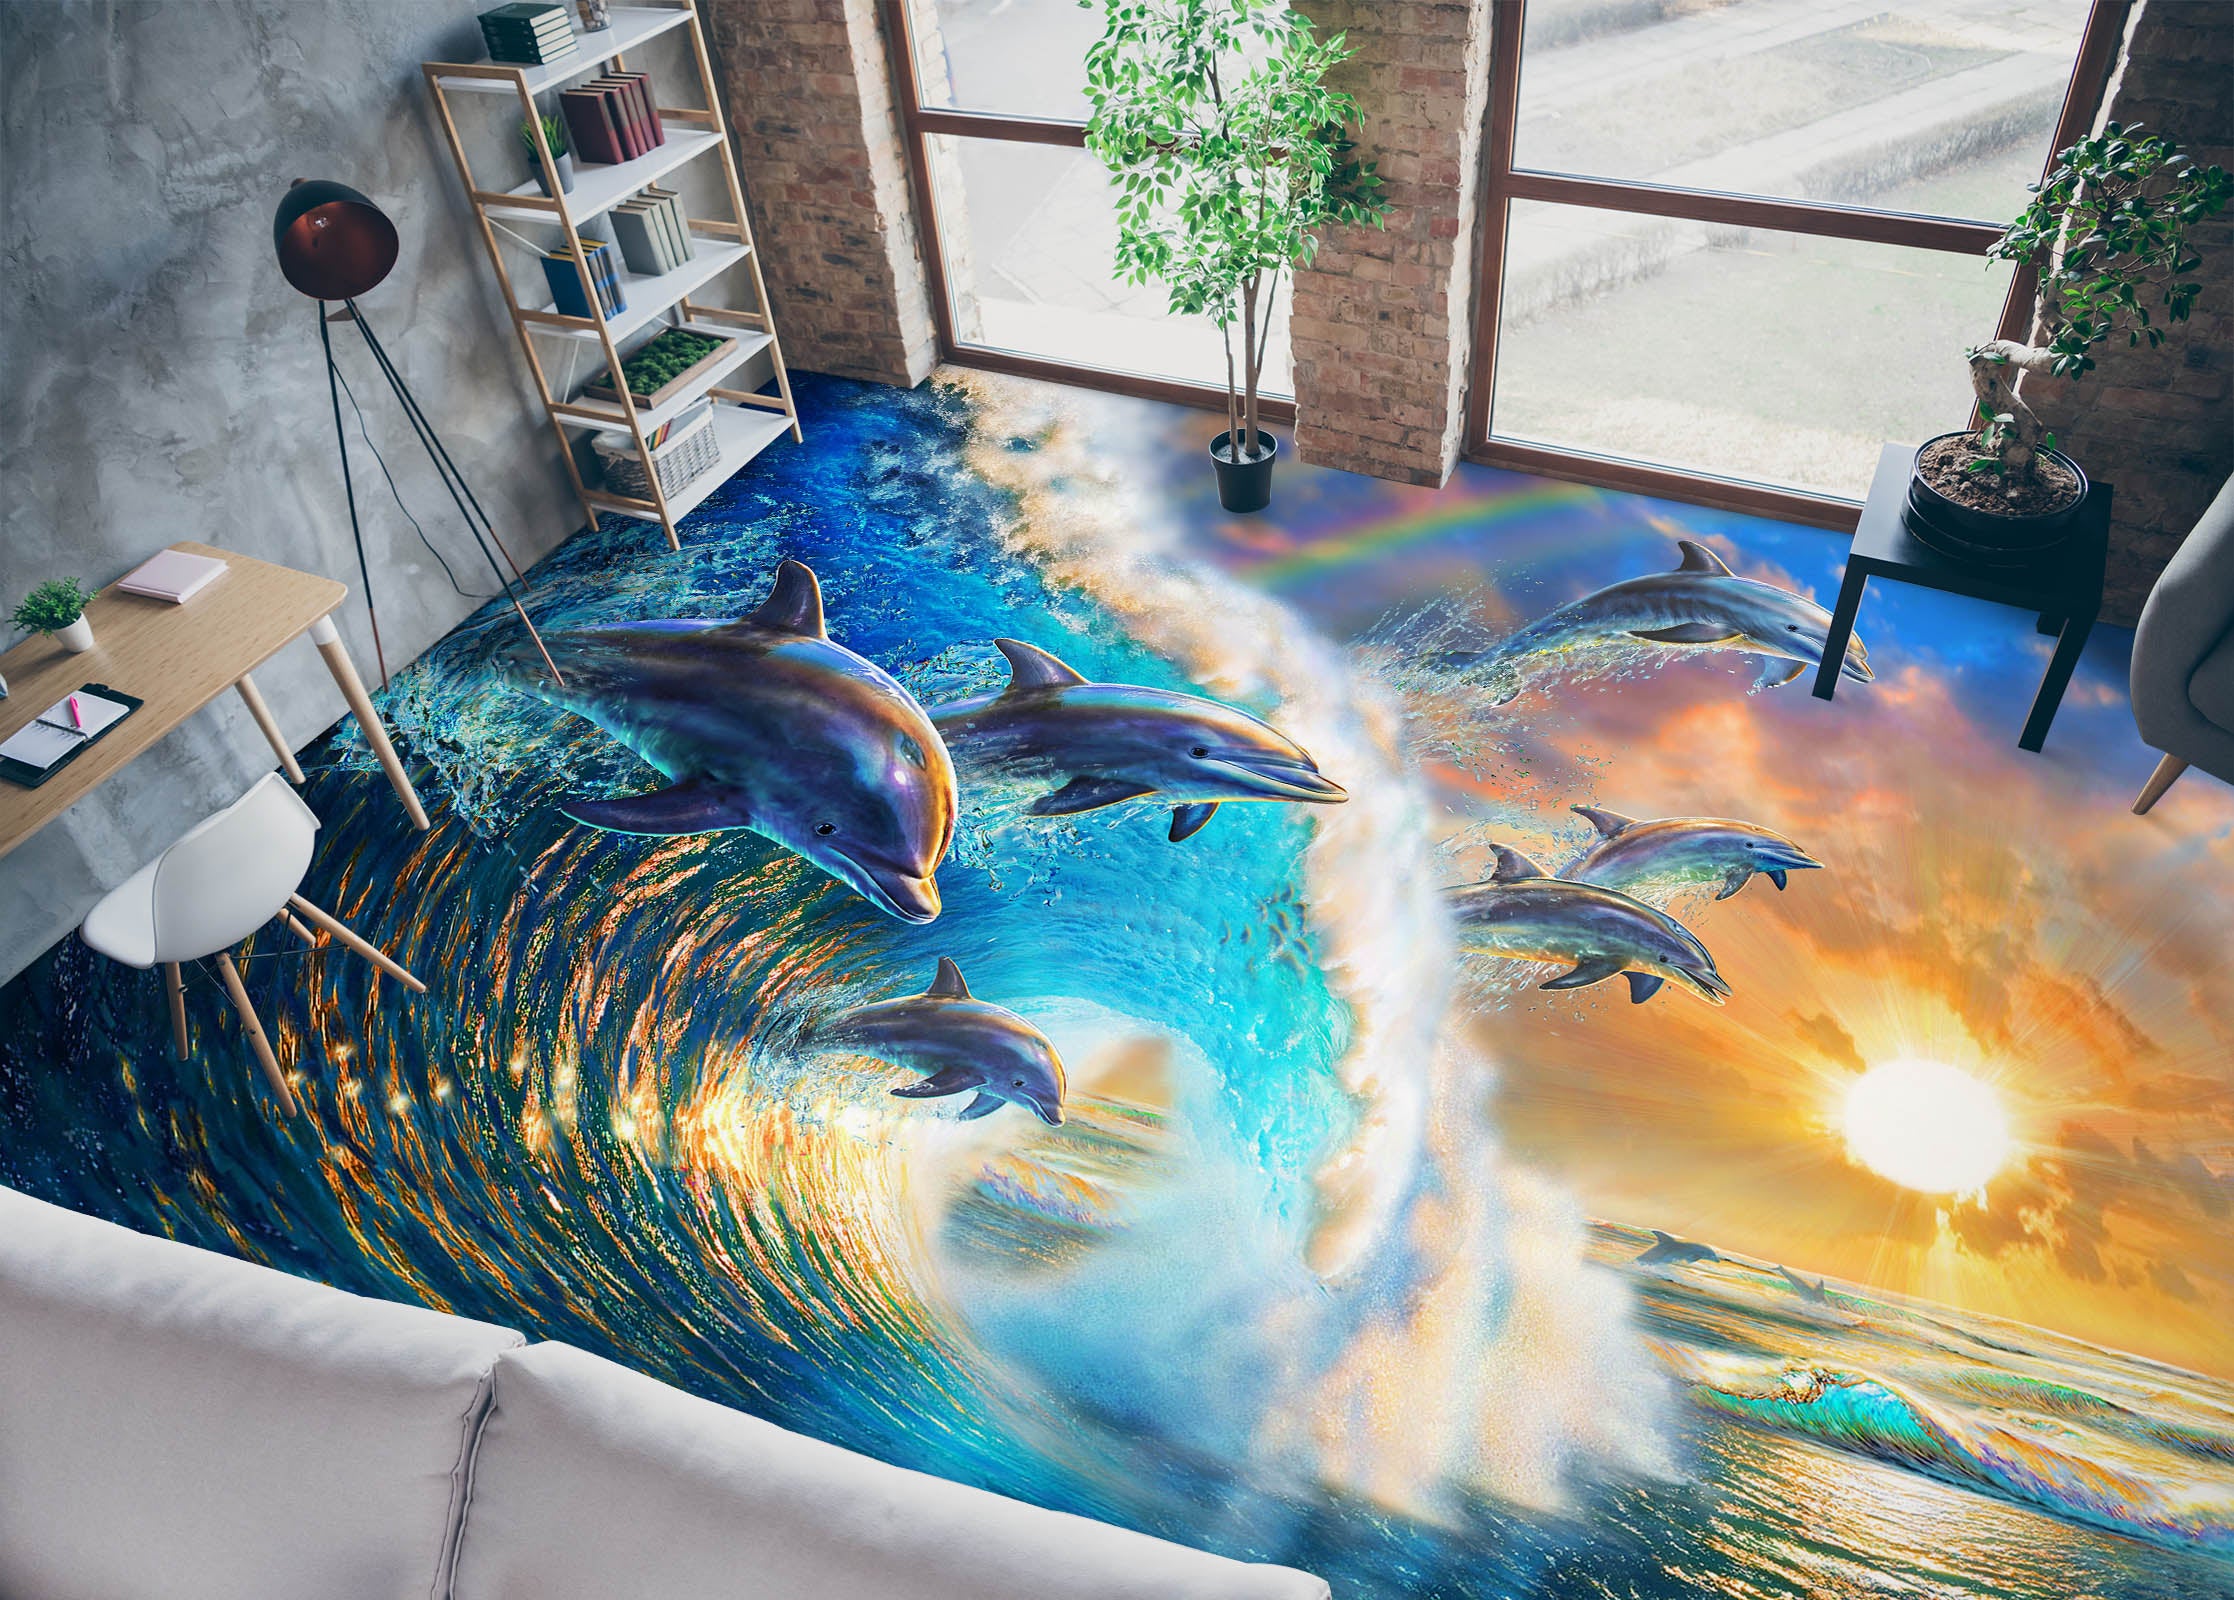 3D Dolphin Waves 98168 Adrian Chesterman Floor Mural  Wallpaper Murals Self-Adhesive Removable Print Epoxy